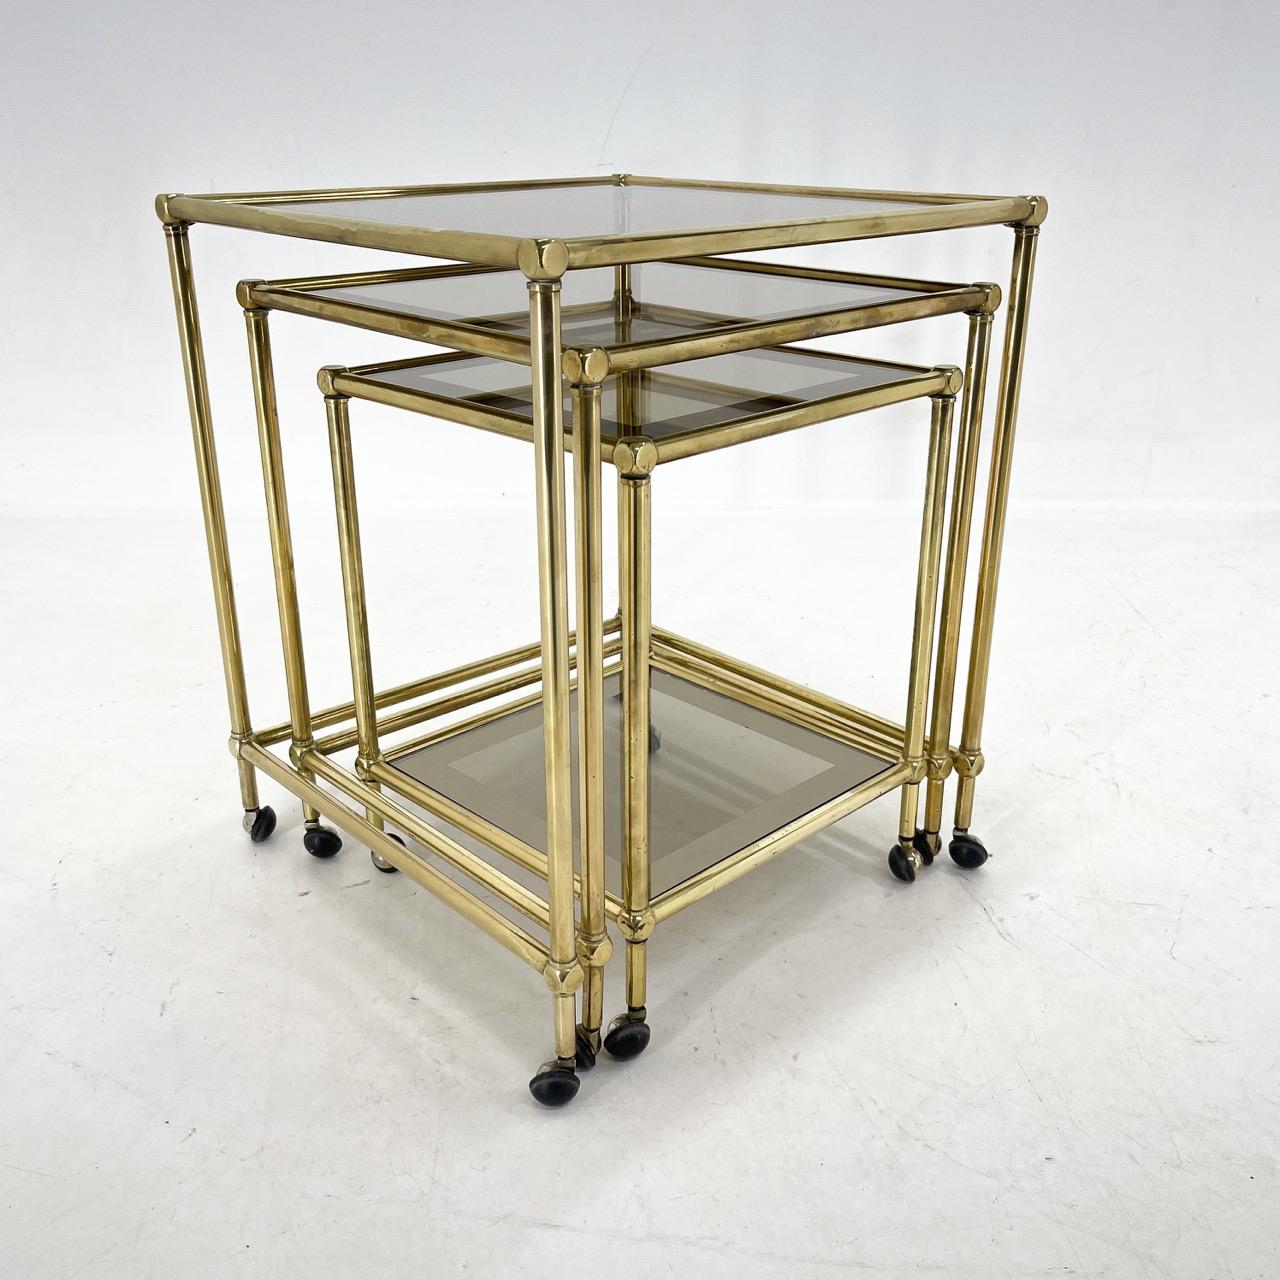 Set of 3 coffee tables made of brass and smokey glass. 
All parts are original in very good vintage condition (see photo). 
Made in Italy in the 1970's.